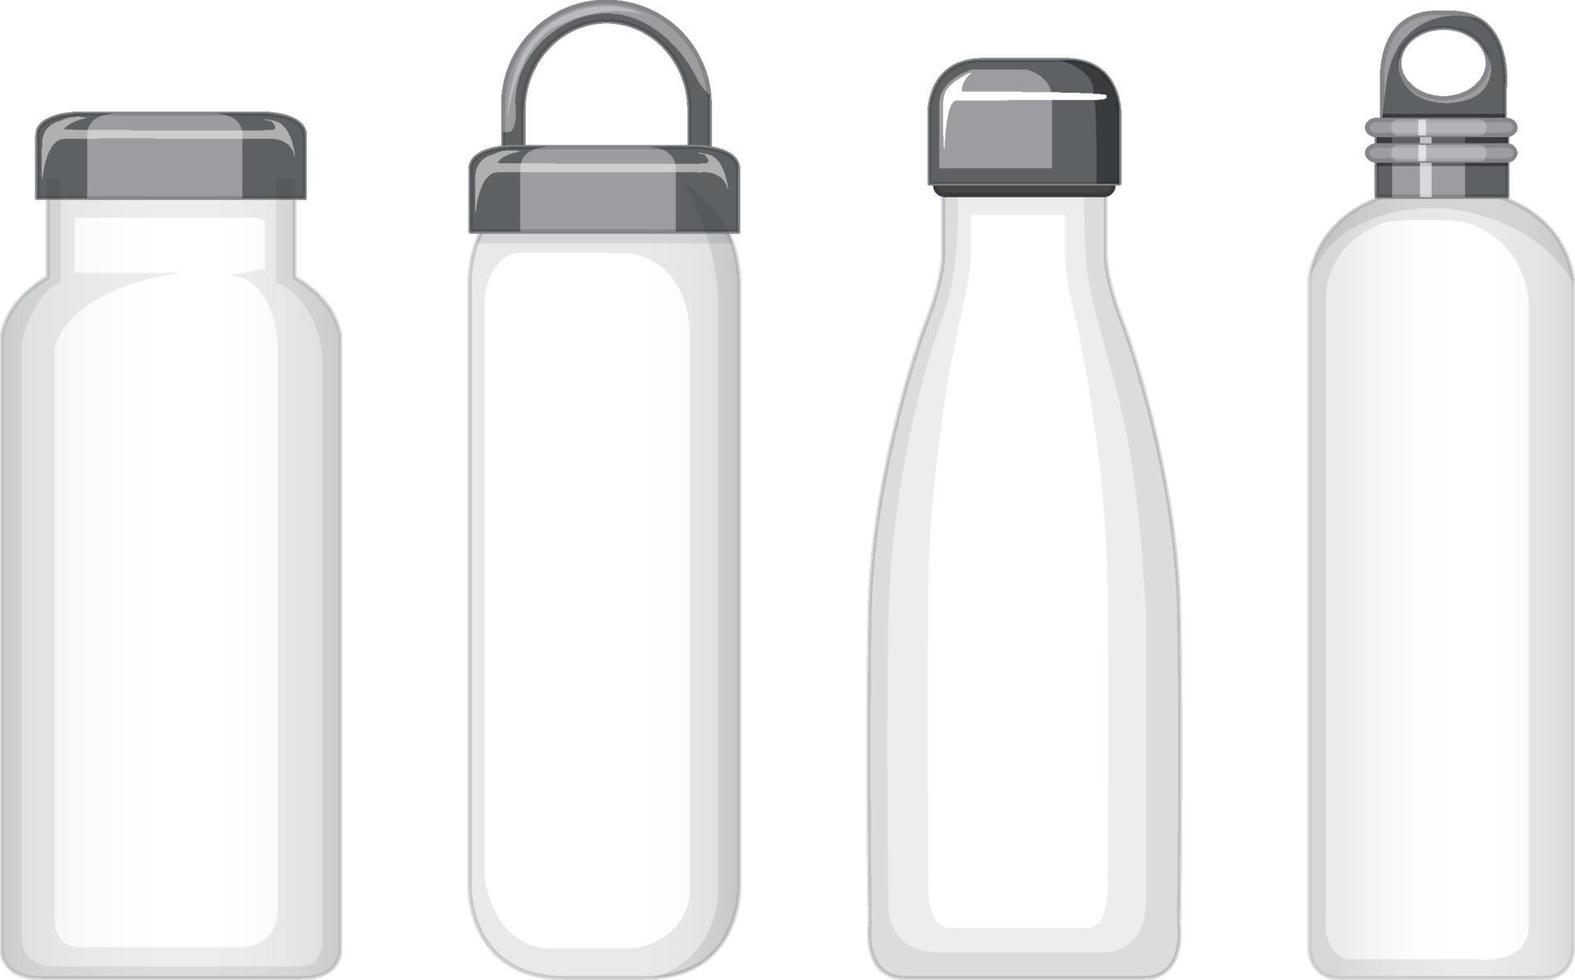 https://static.vecteezy.com/system/resources/previews/002/790/862/non_2x/set-of-different-white-metal-water-bottles-isolated-free-vector.jpg